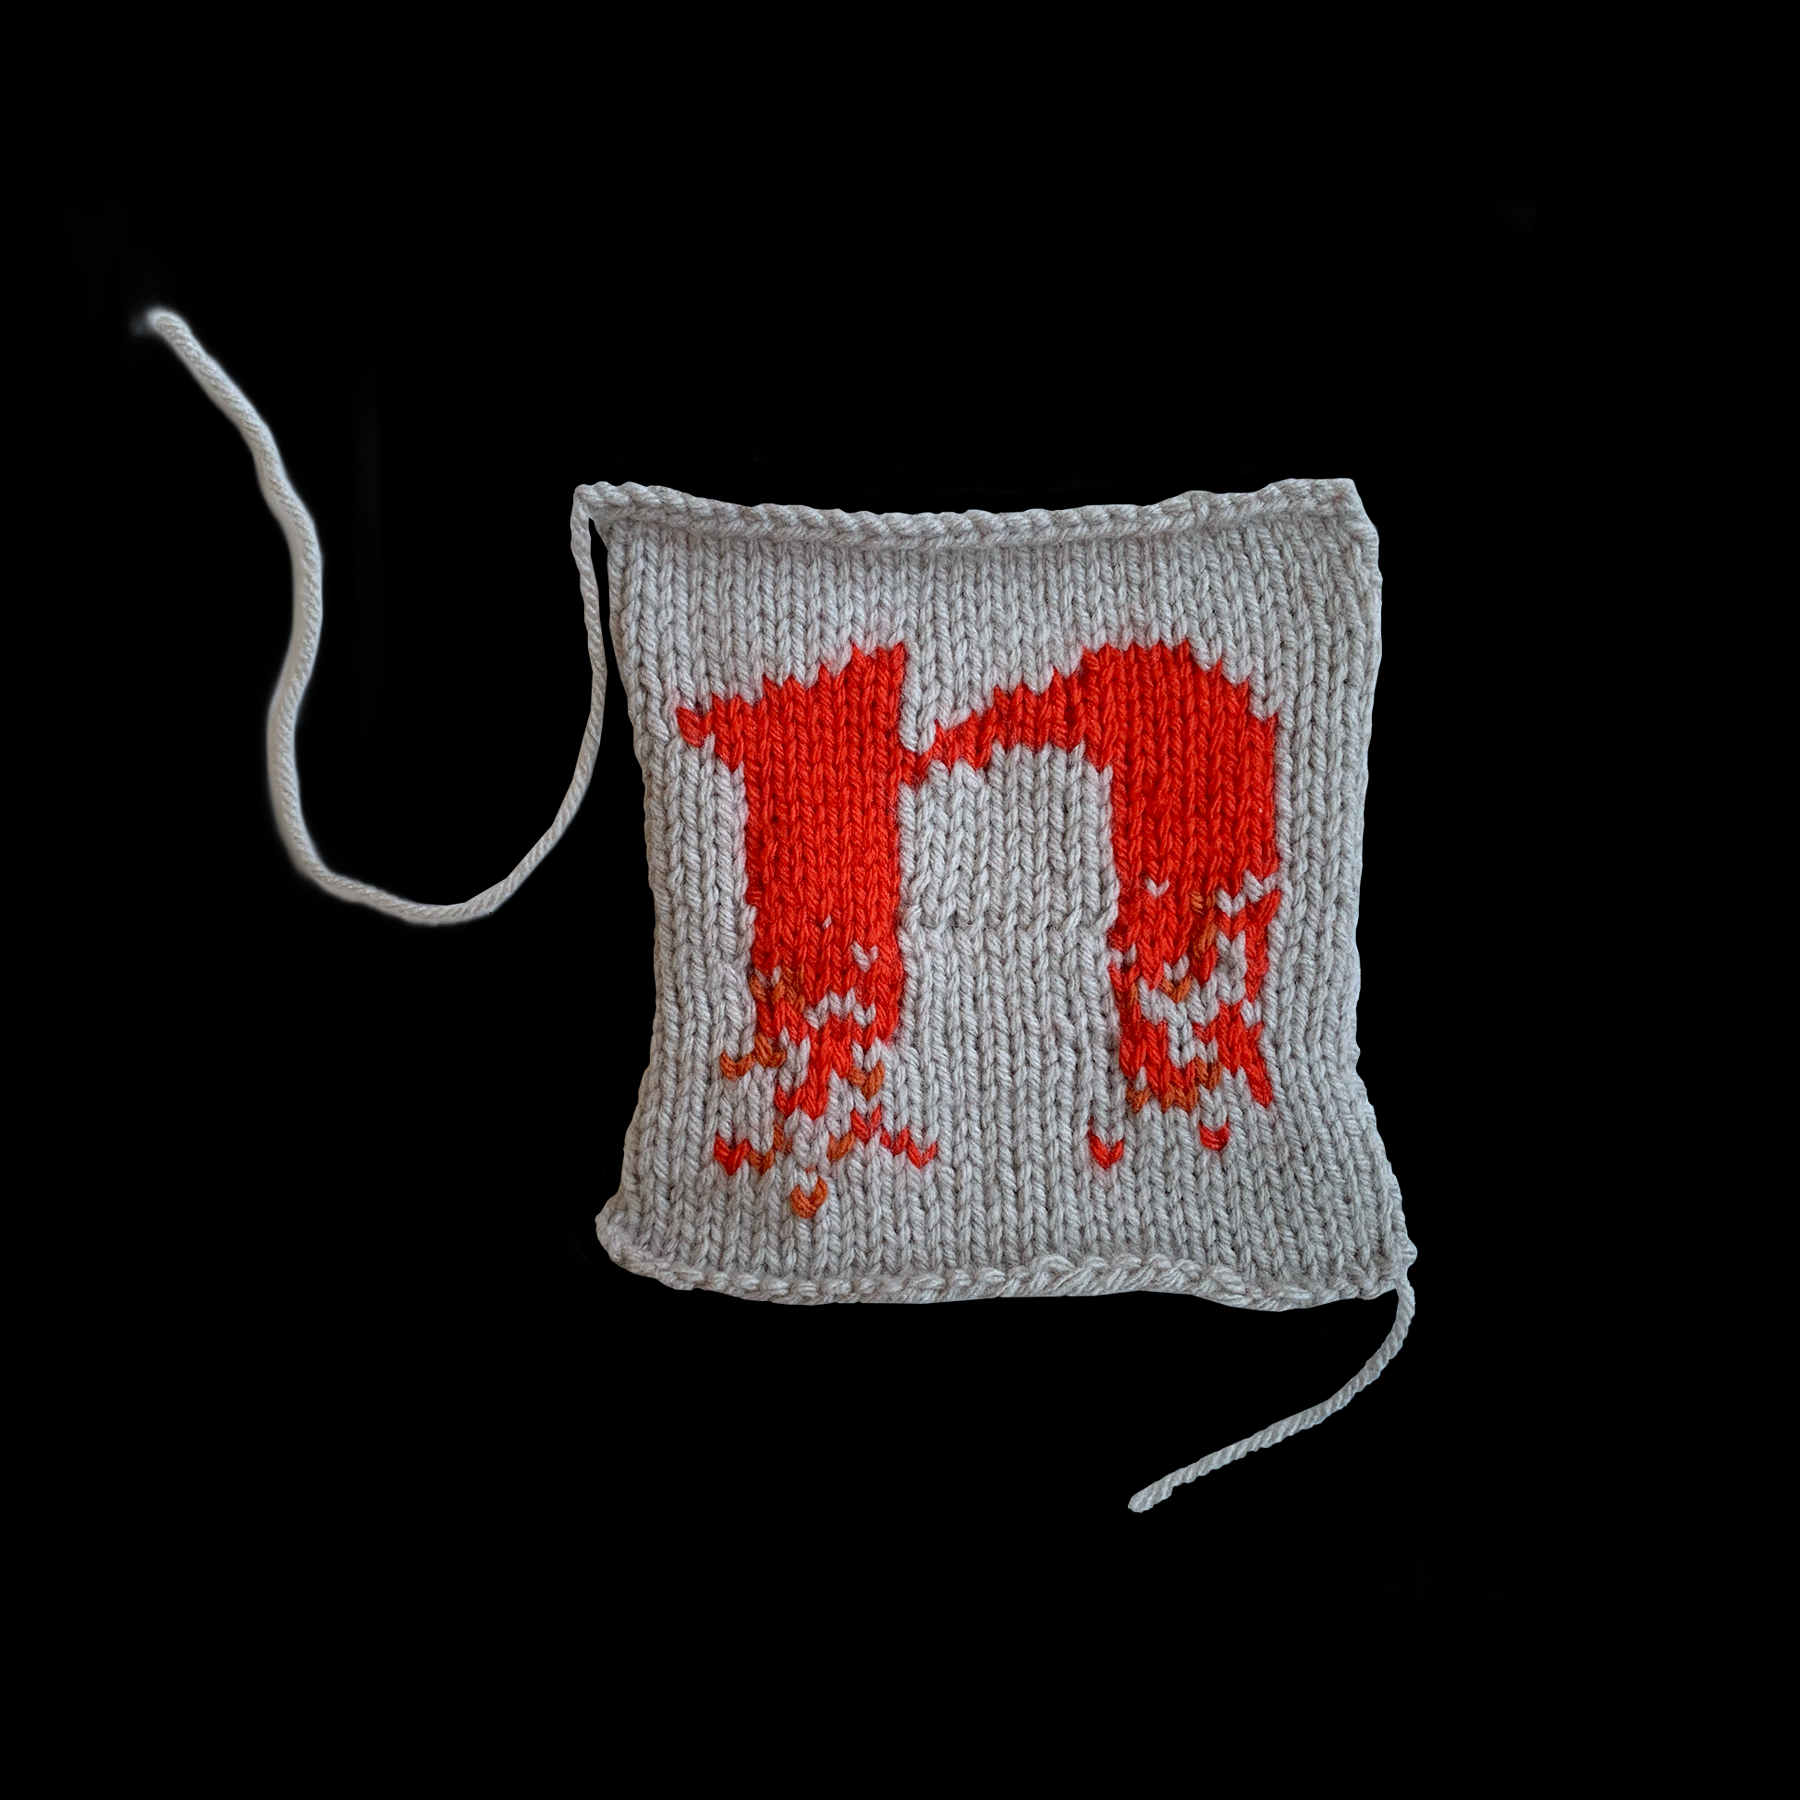 Image of a knitted letter